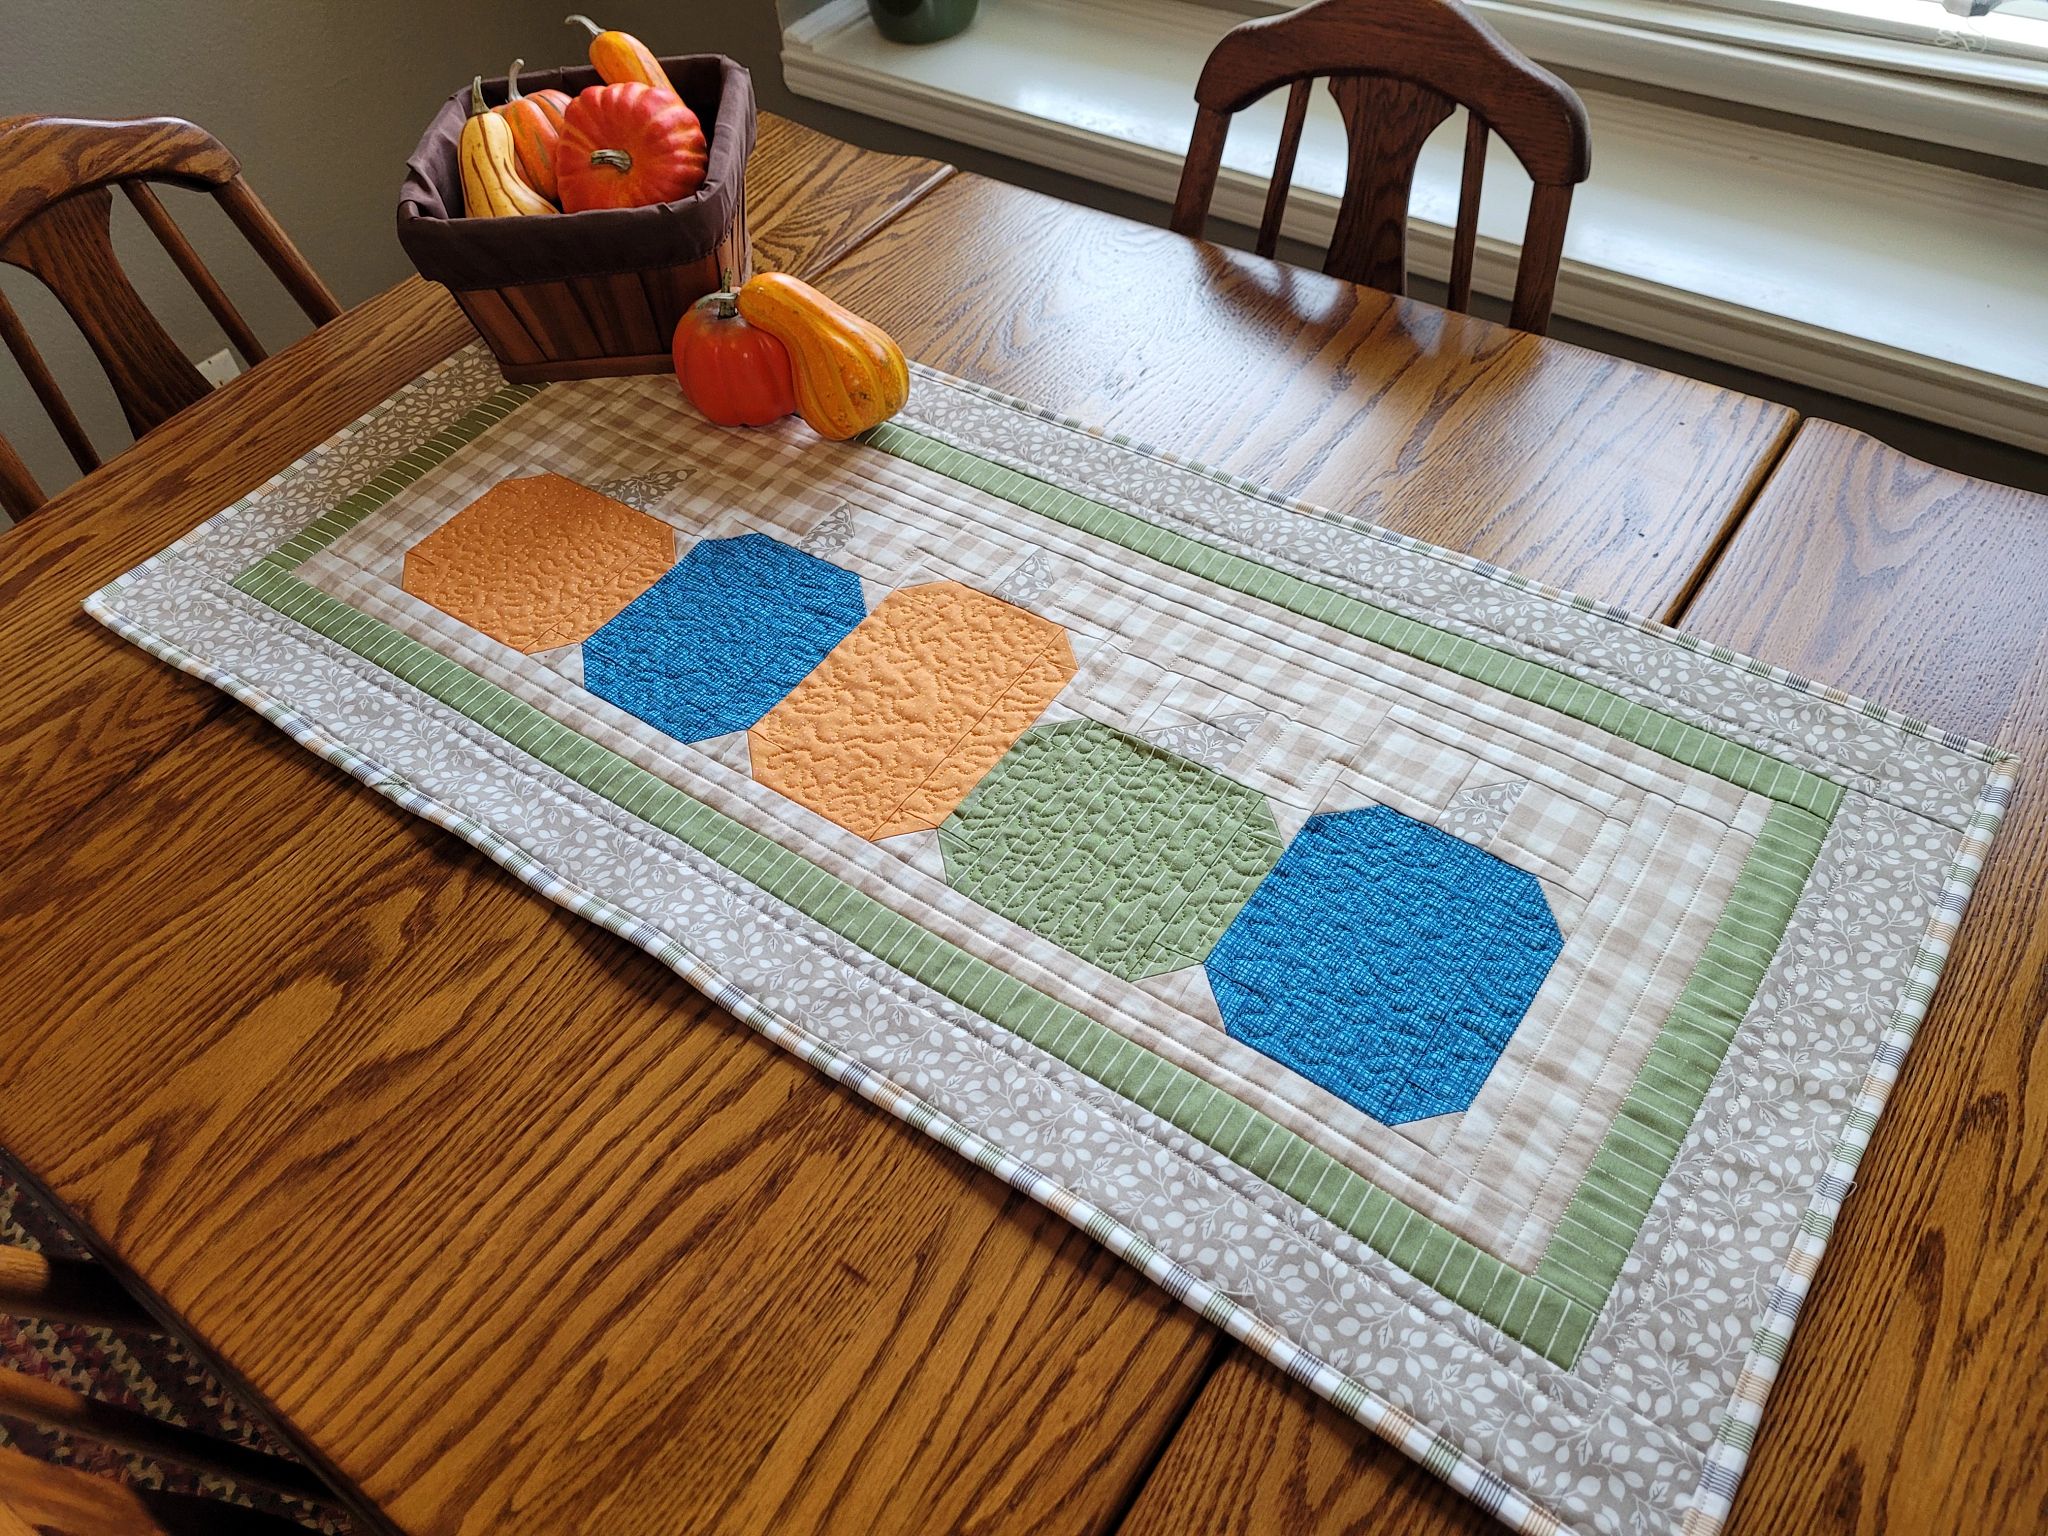 Quilted Pumpkin Table Runner by Meredith McClanahan